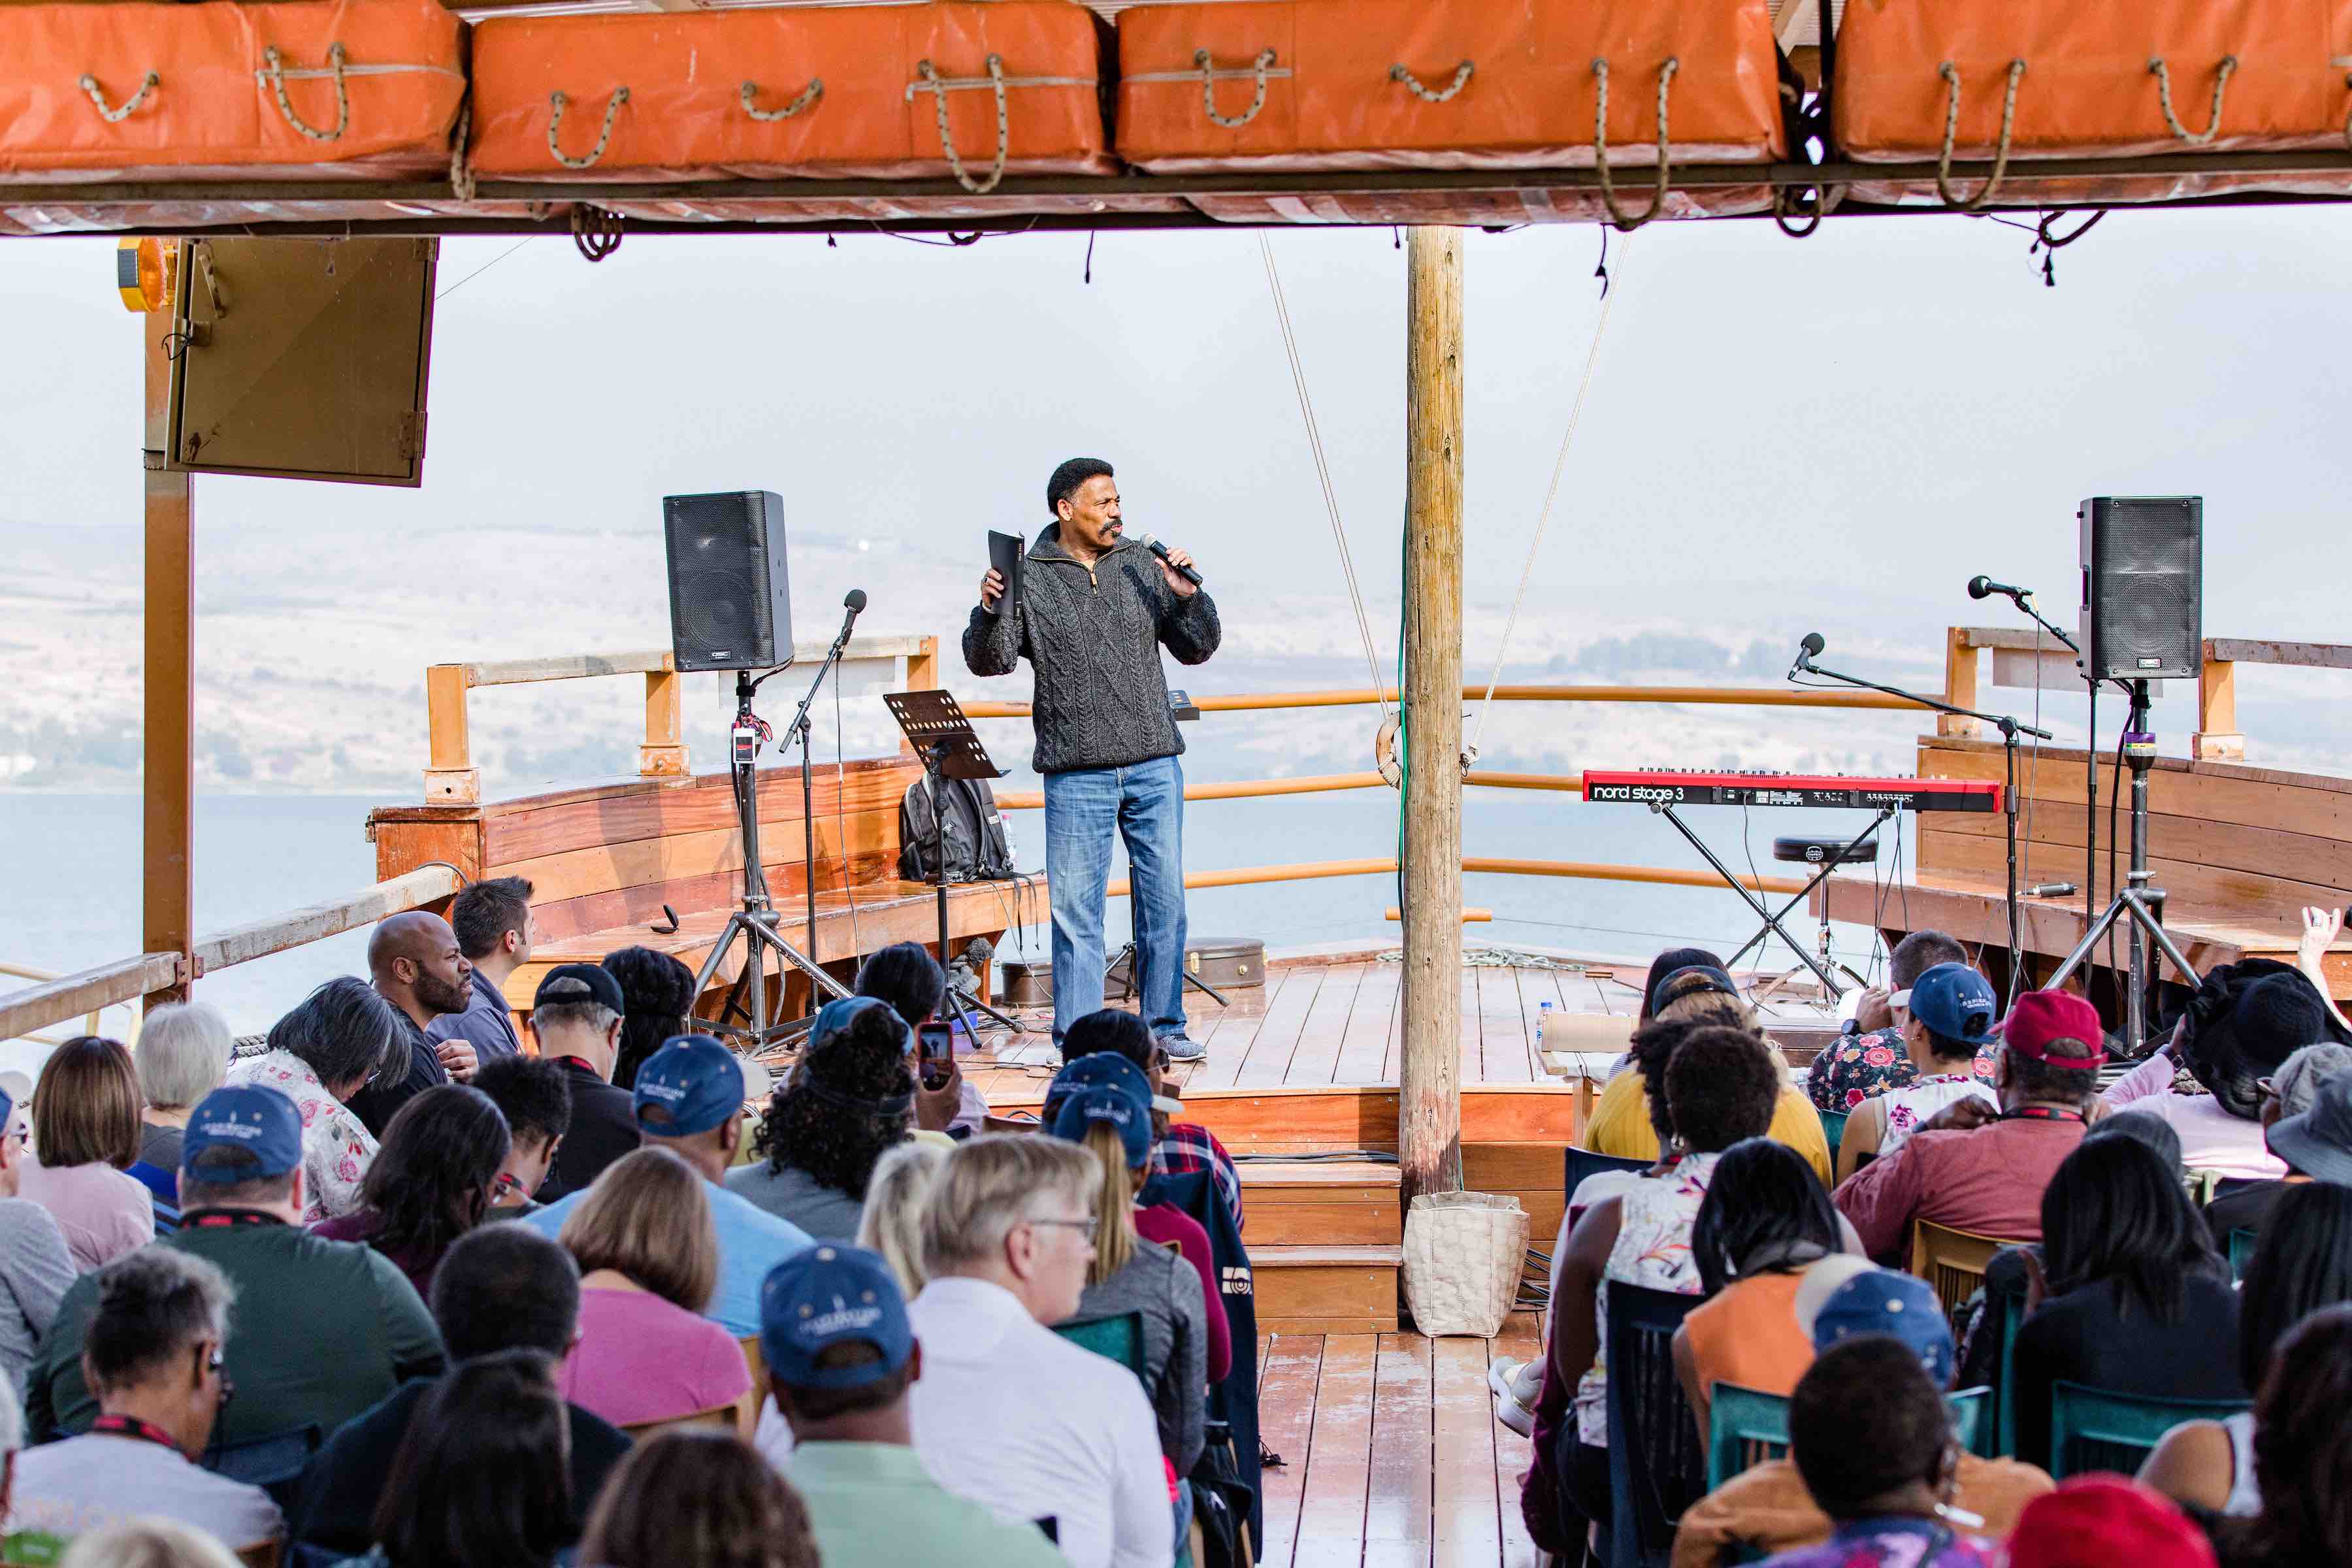 Tony Evans holding the Bible and preaching to a group of people on a first-century replica boat on the Sea of Galilee